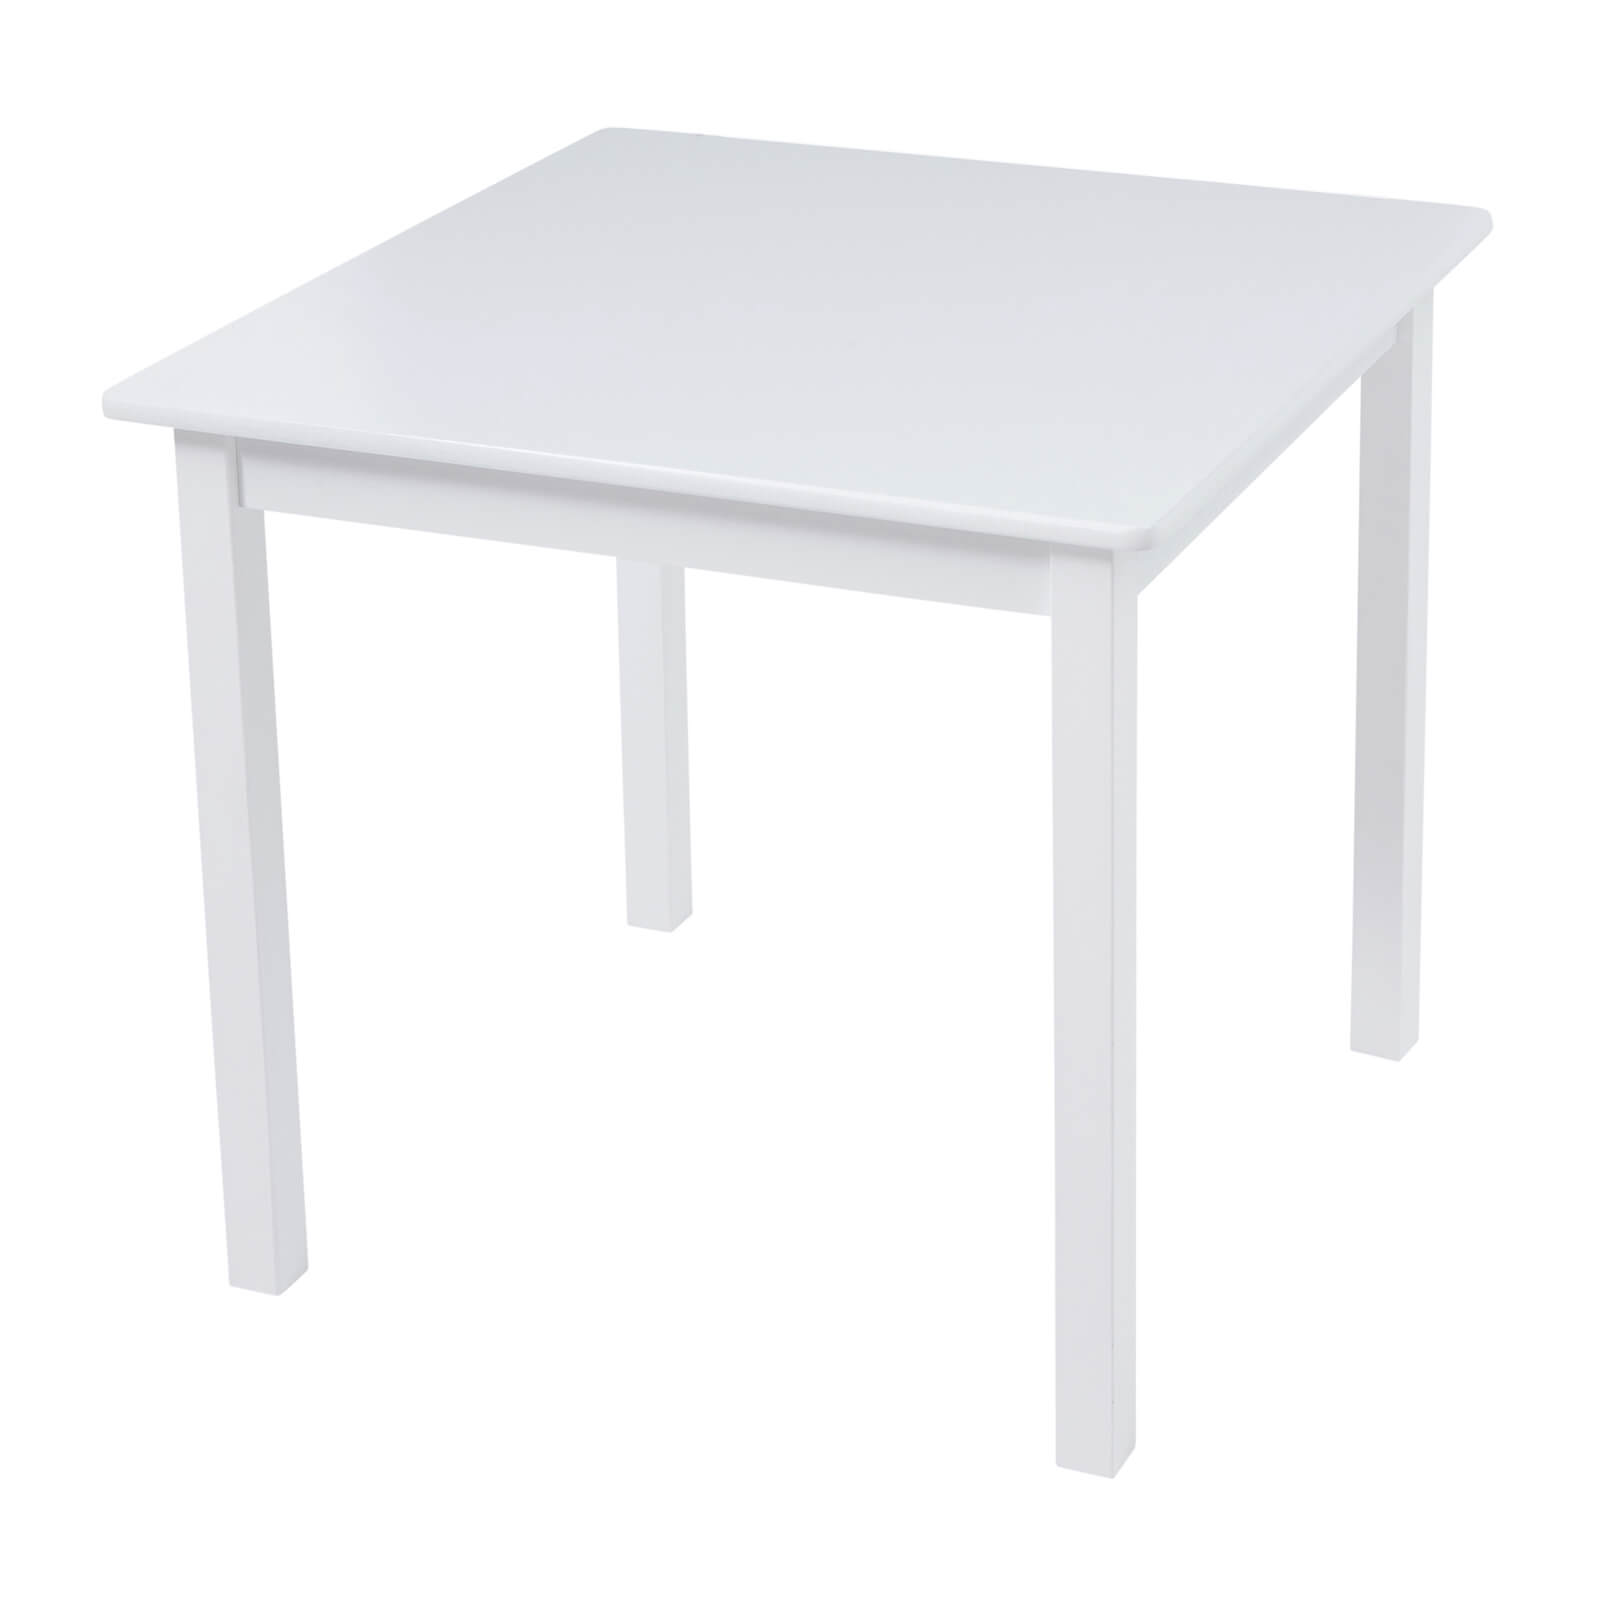 Wooden Table and Chair Set - White